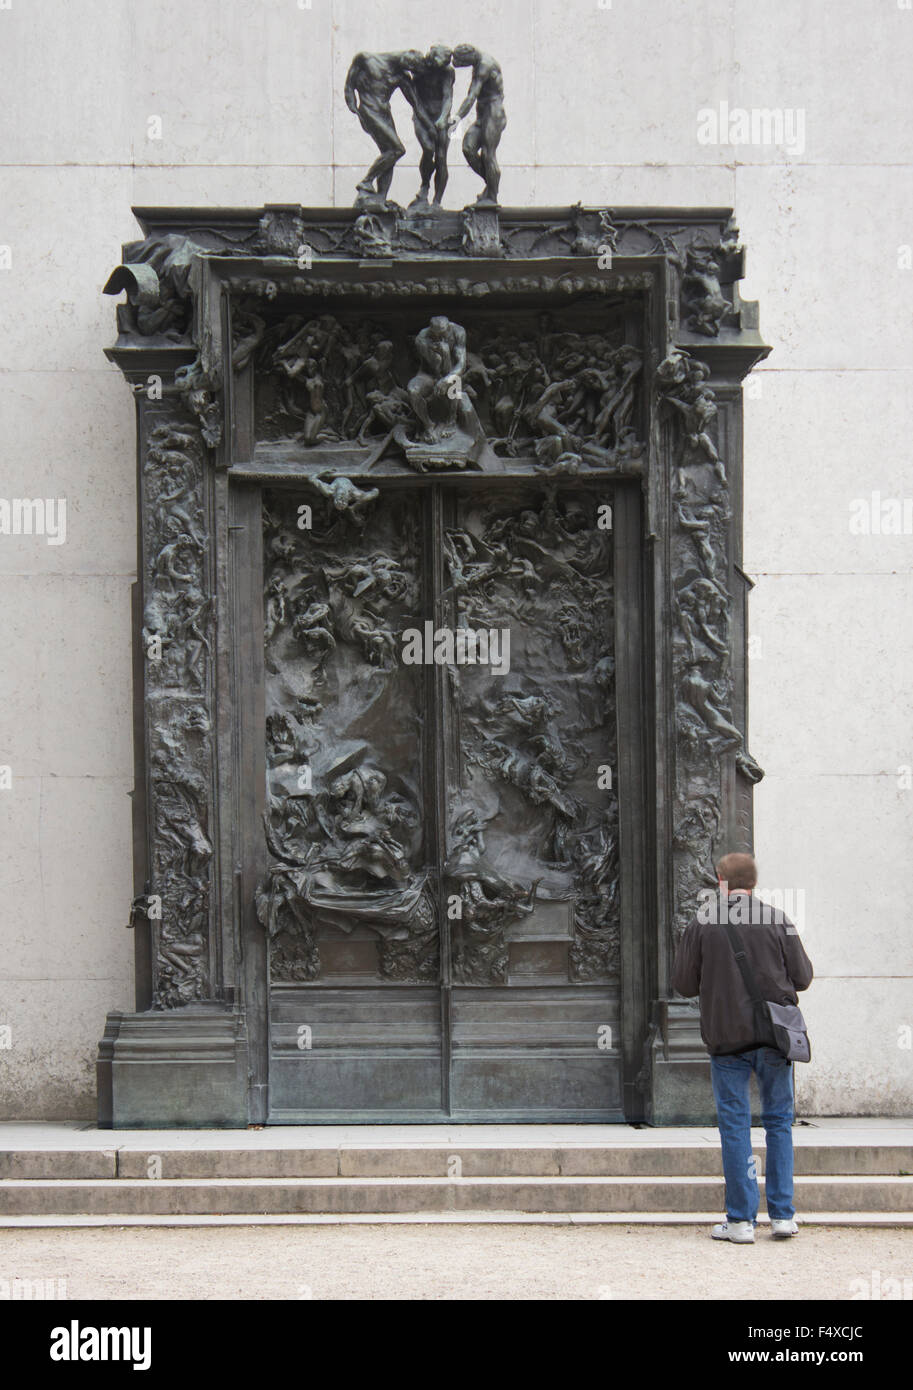 'The Gates of Hell' by Rodin, installed in the gardens at the Rodin Museum in Paris, France. Stock Photo